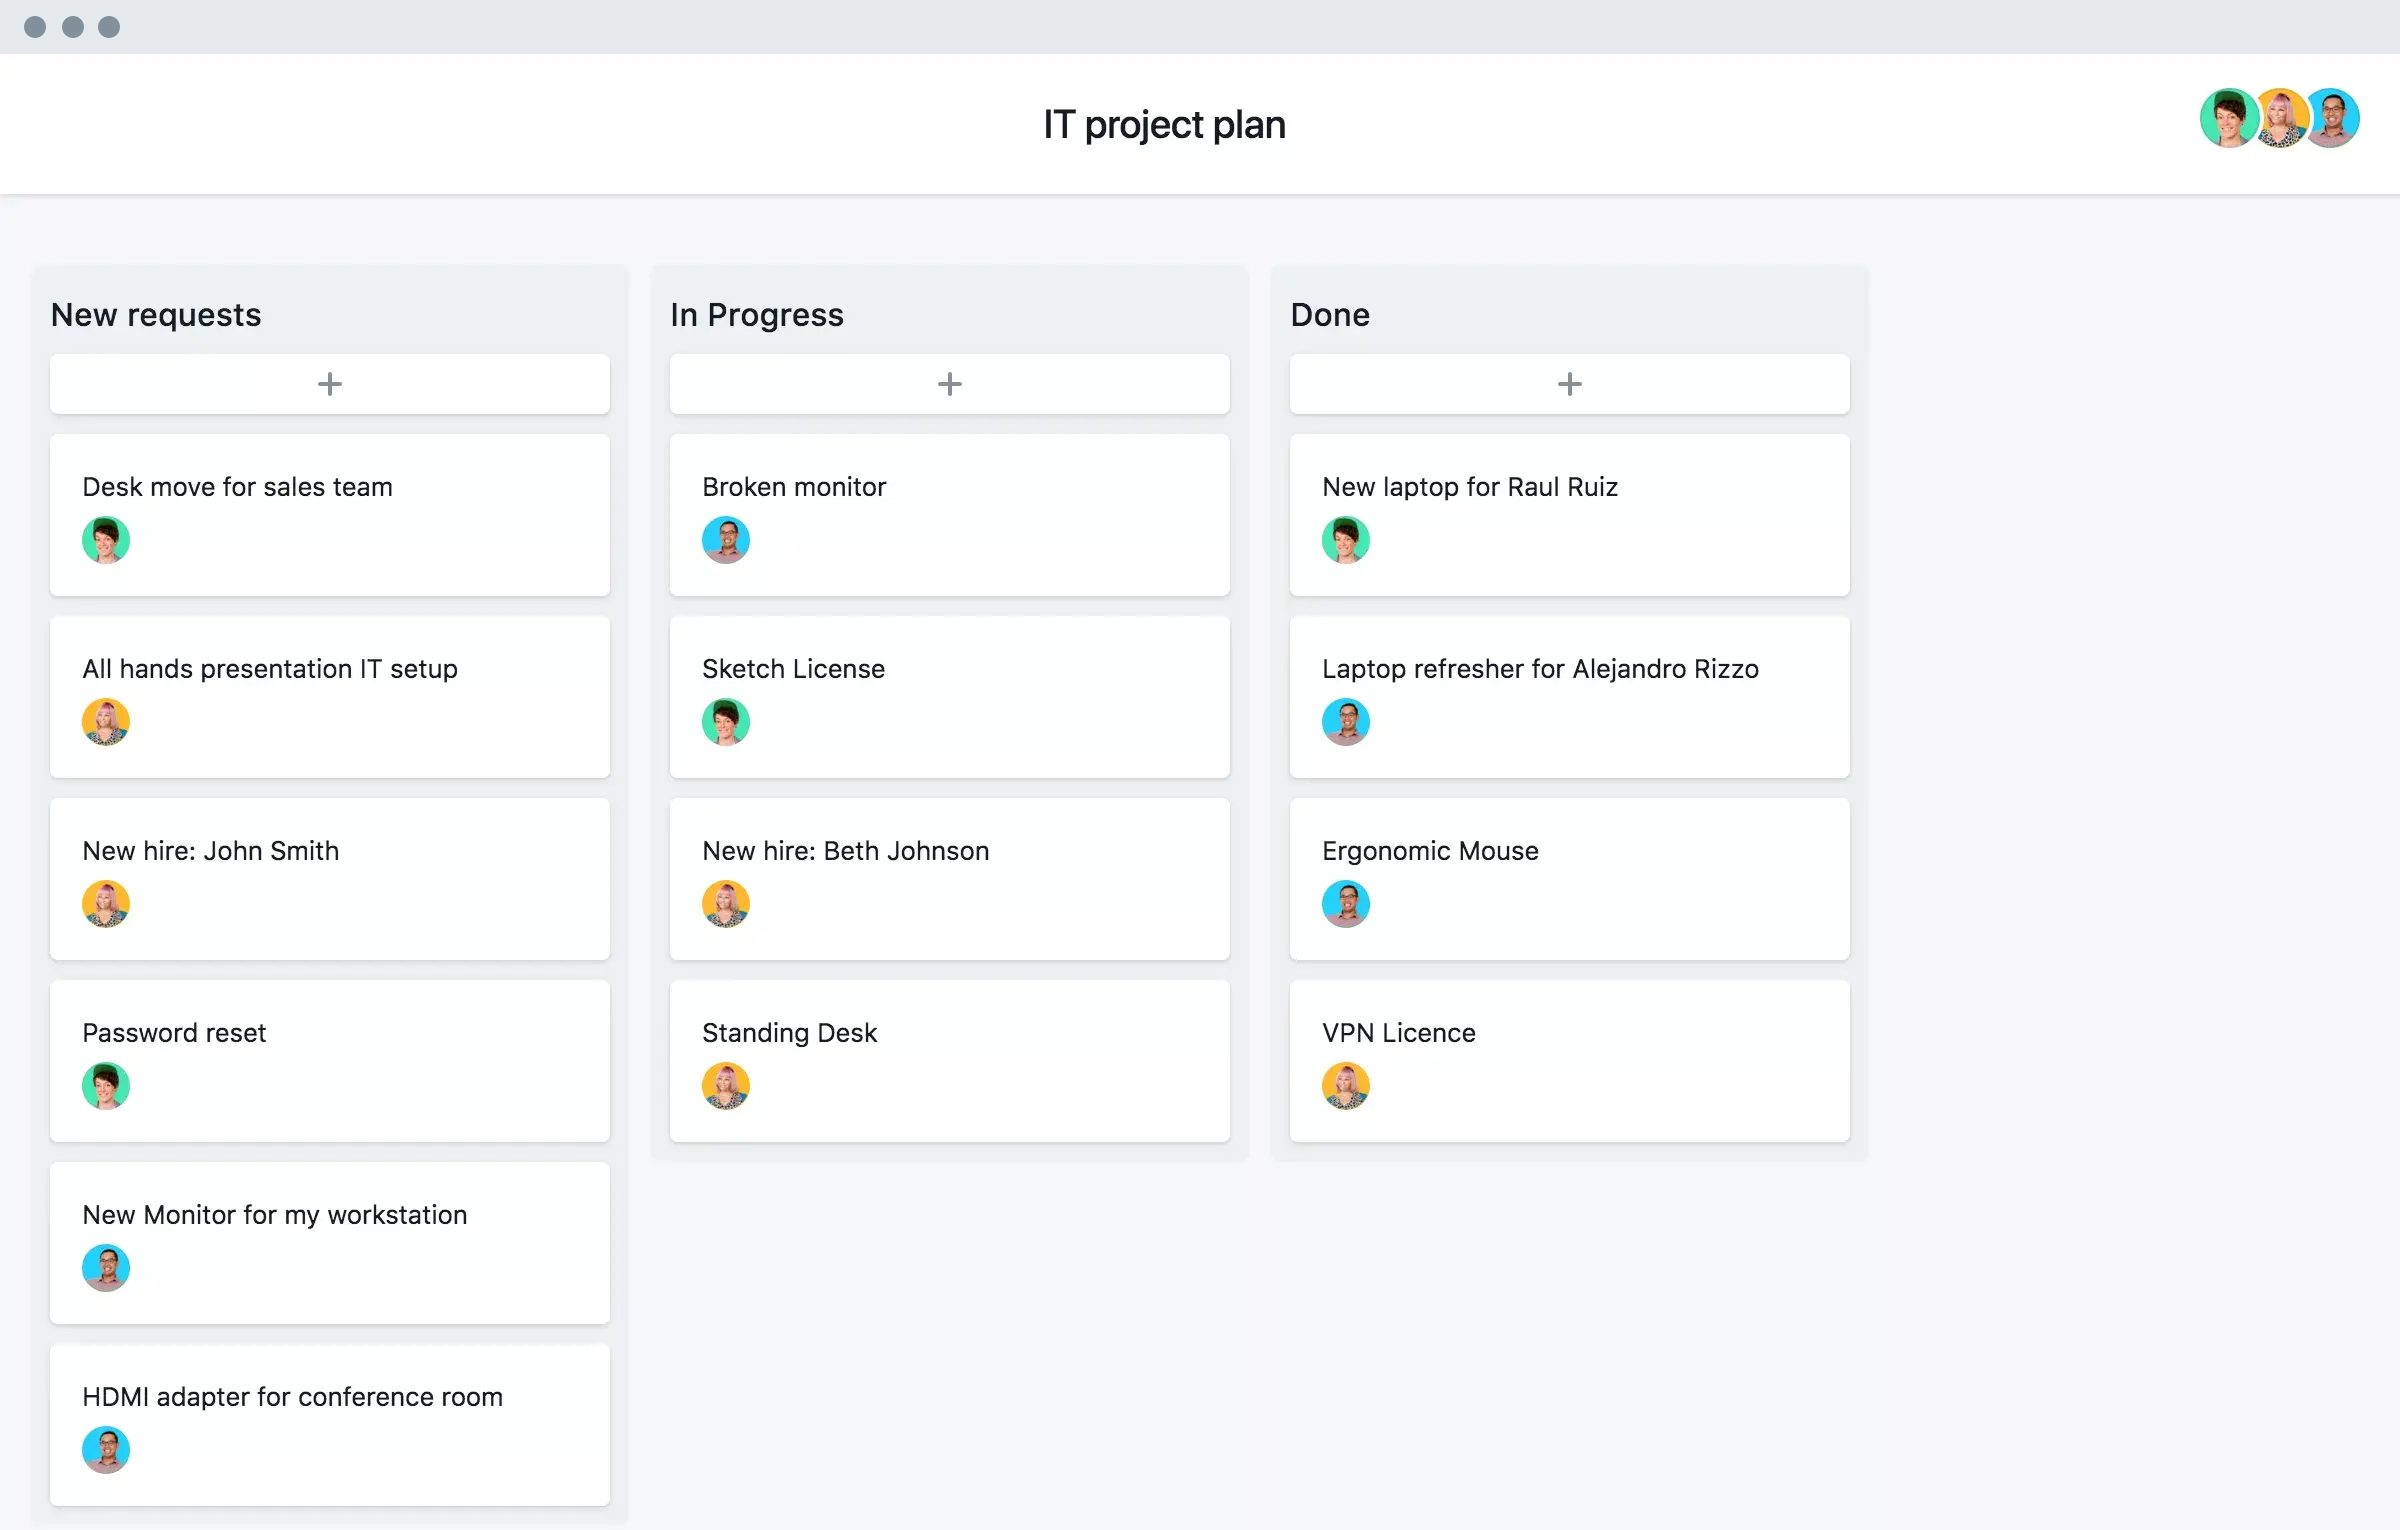 [Old product ui] IT project plan template in Asana, Kanban board style view (Boards)